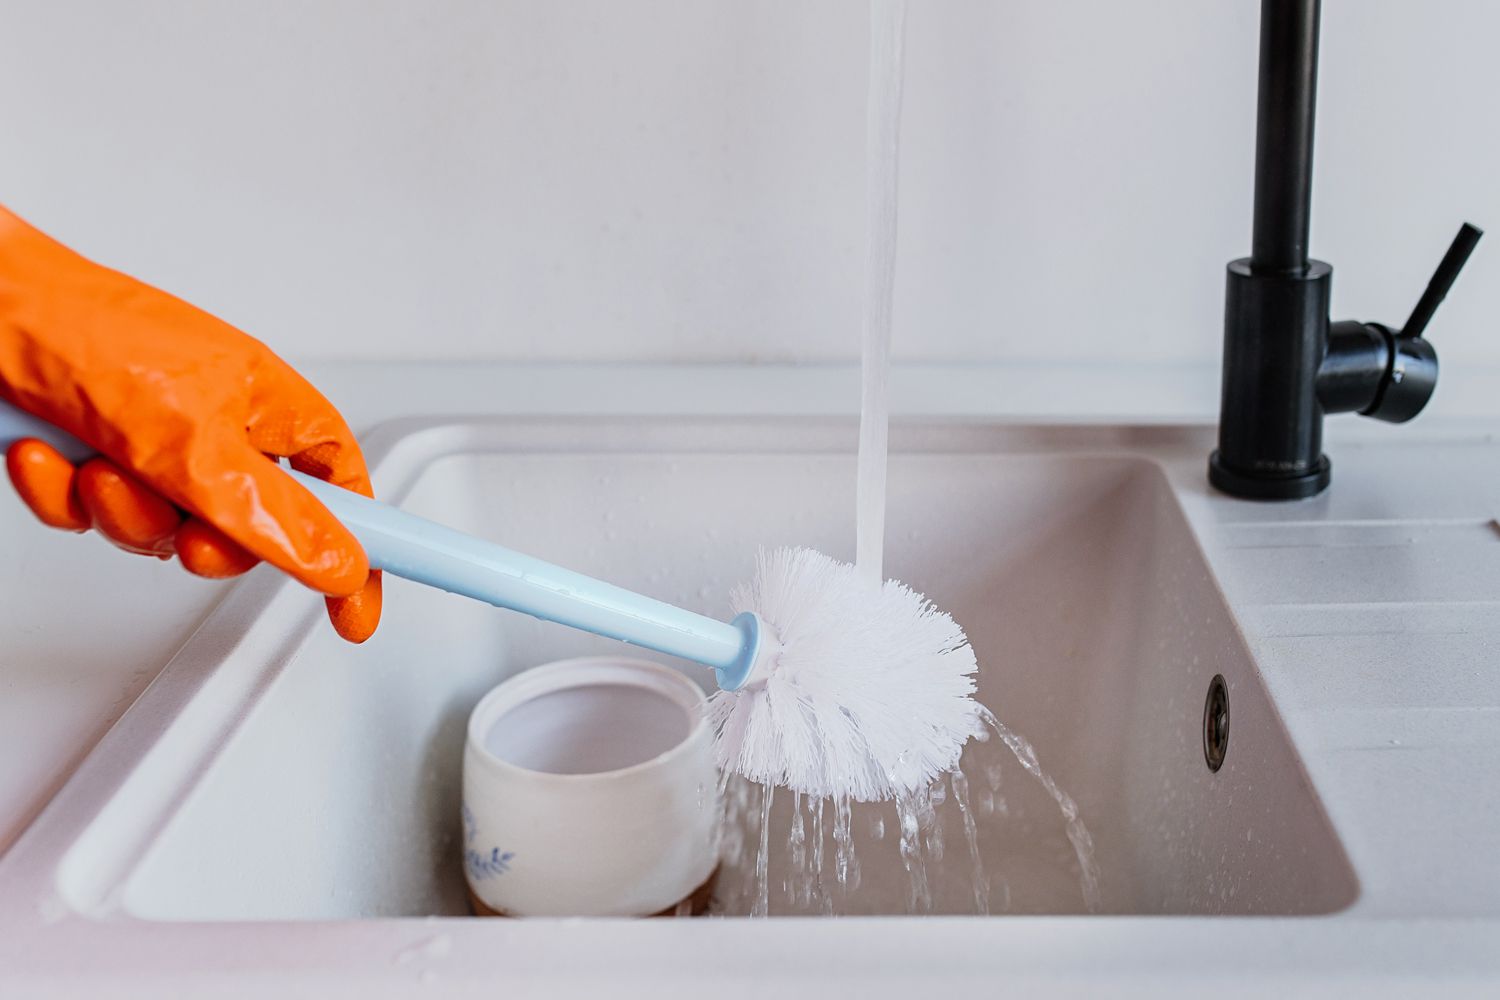 How To Clean Toilet Bowl Brush